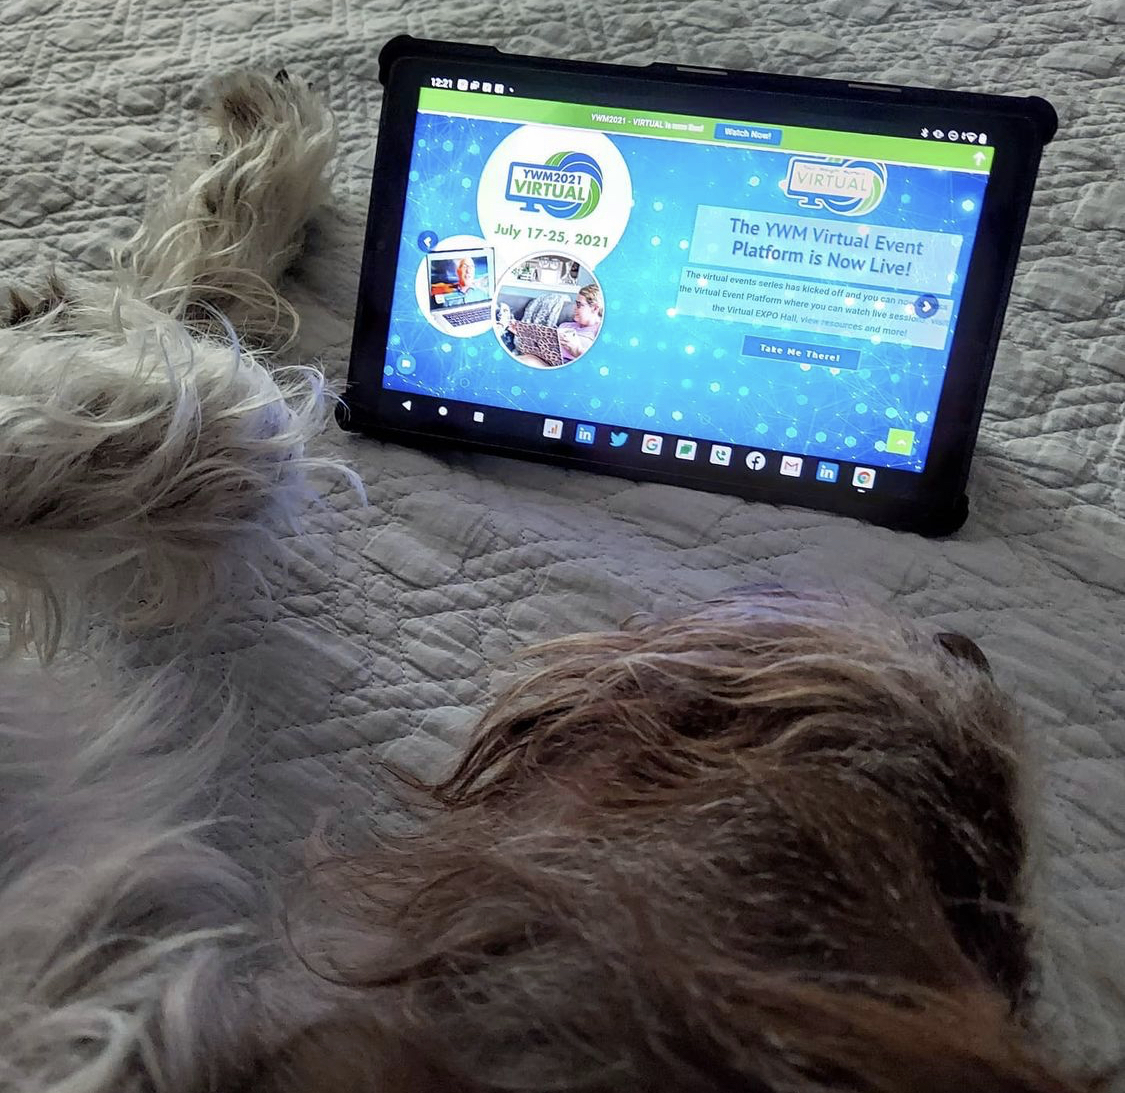 Aren't our OAC pets PAW-SOME?! 🐶🐾🐱 .... They think we're funny.

Be sure to share pictures of your pets attending alongside you with the hashtag #YourWeightMattersVirtual

ywmconvention.com/ywm-virtual/re…